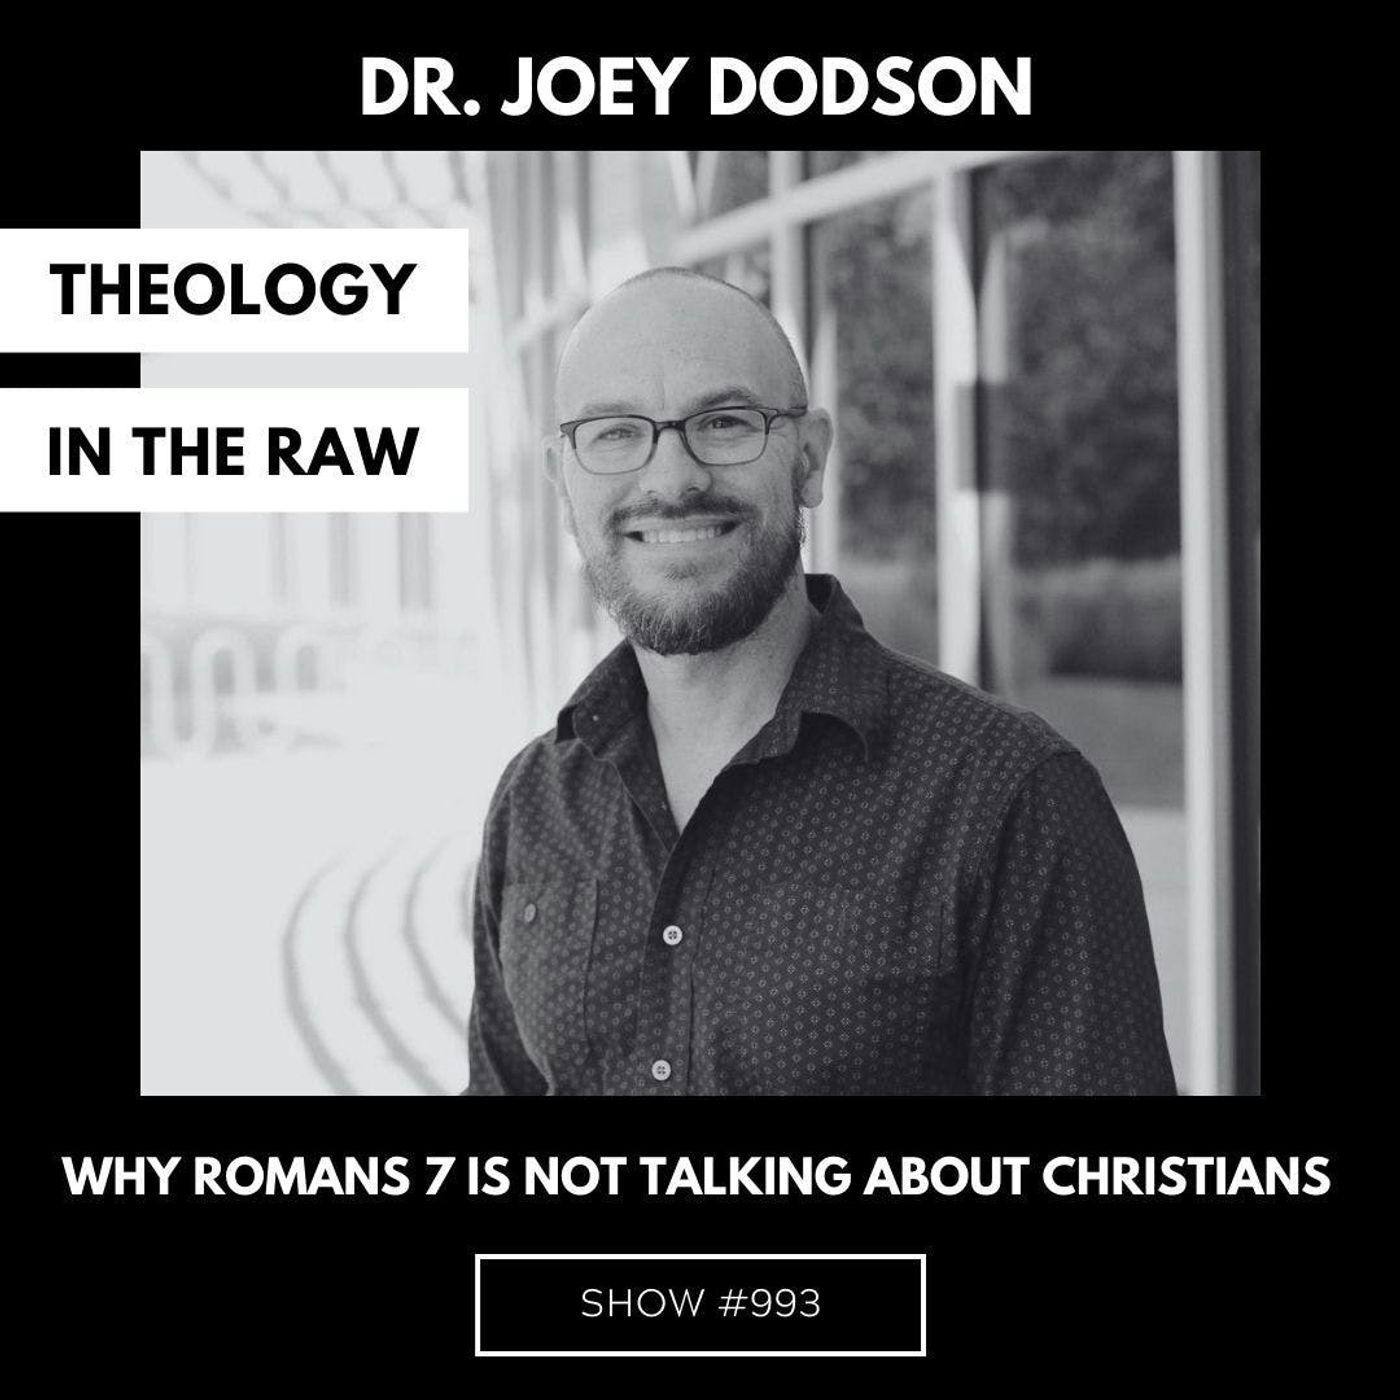 S9 Ep993: #993 - Why Romans 7 is NOT Talking about Christians: Dr. Joey Dodson